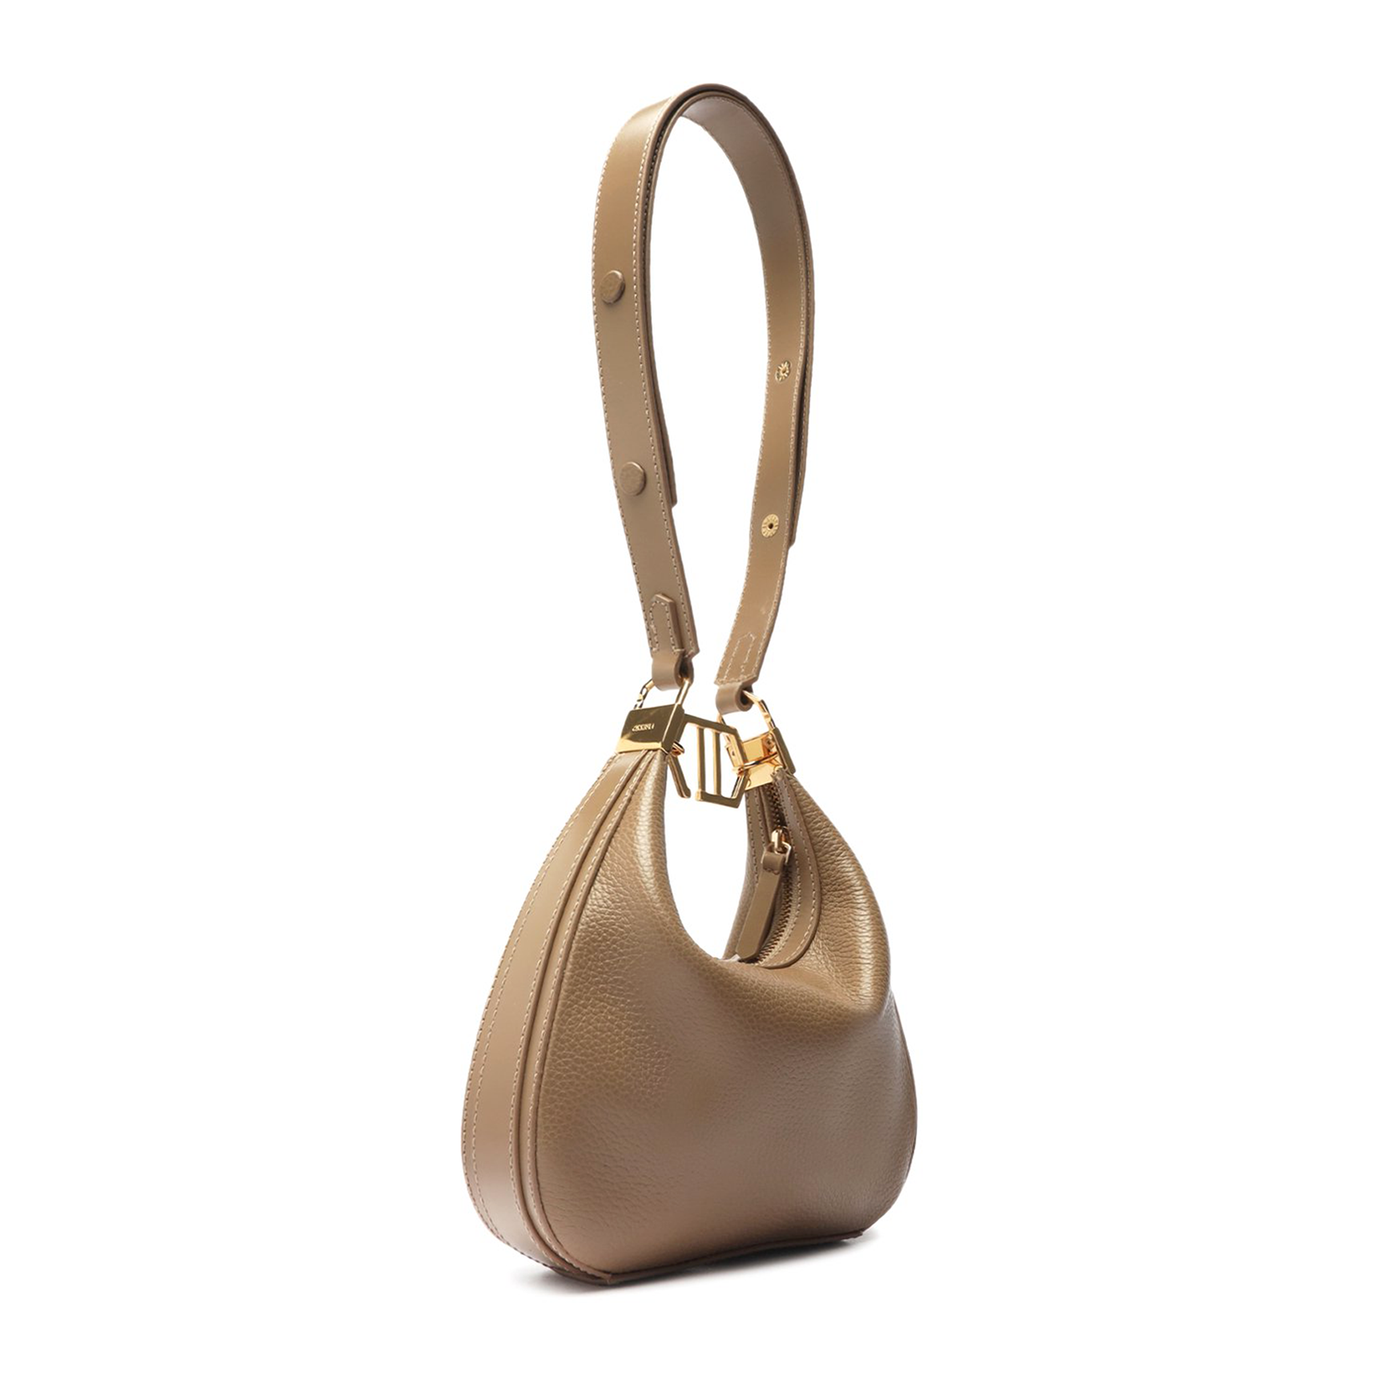 CARTERA FLOATER TAUPE